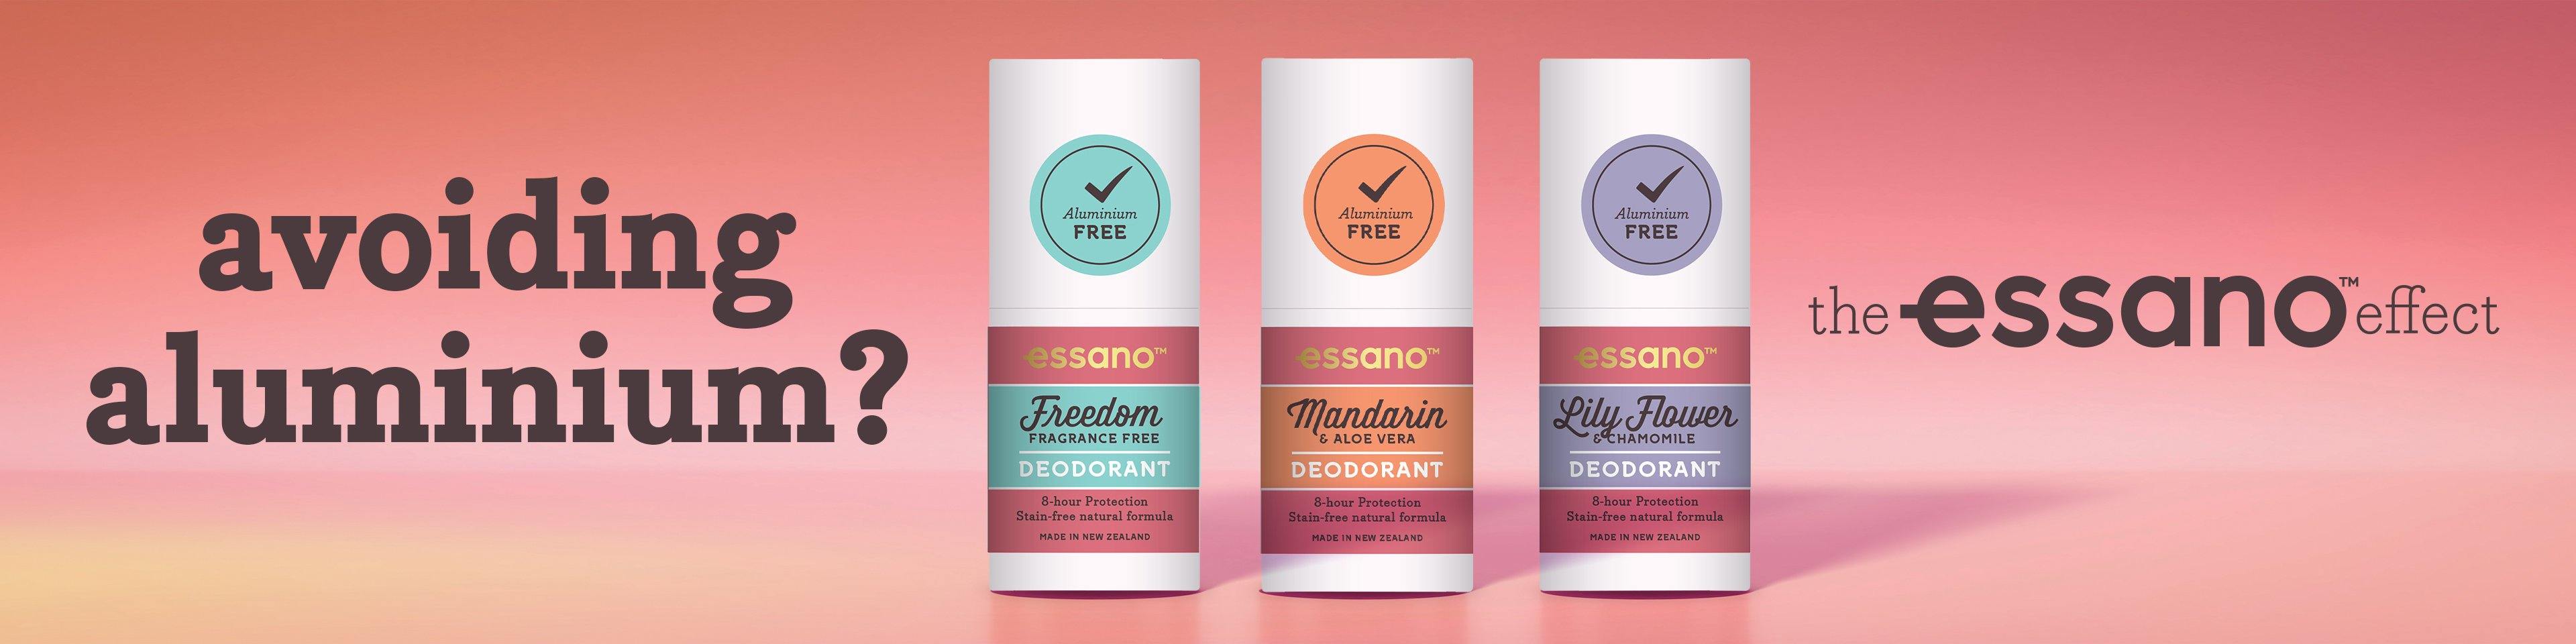 A natural deodorant that works!